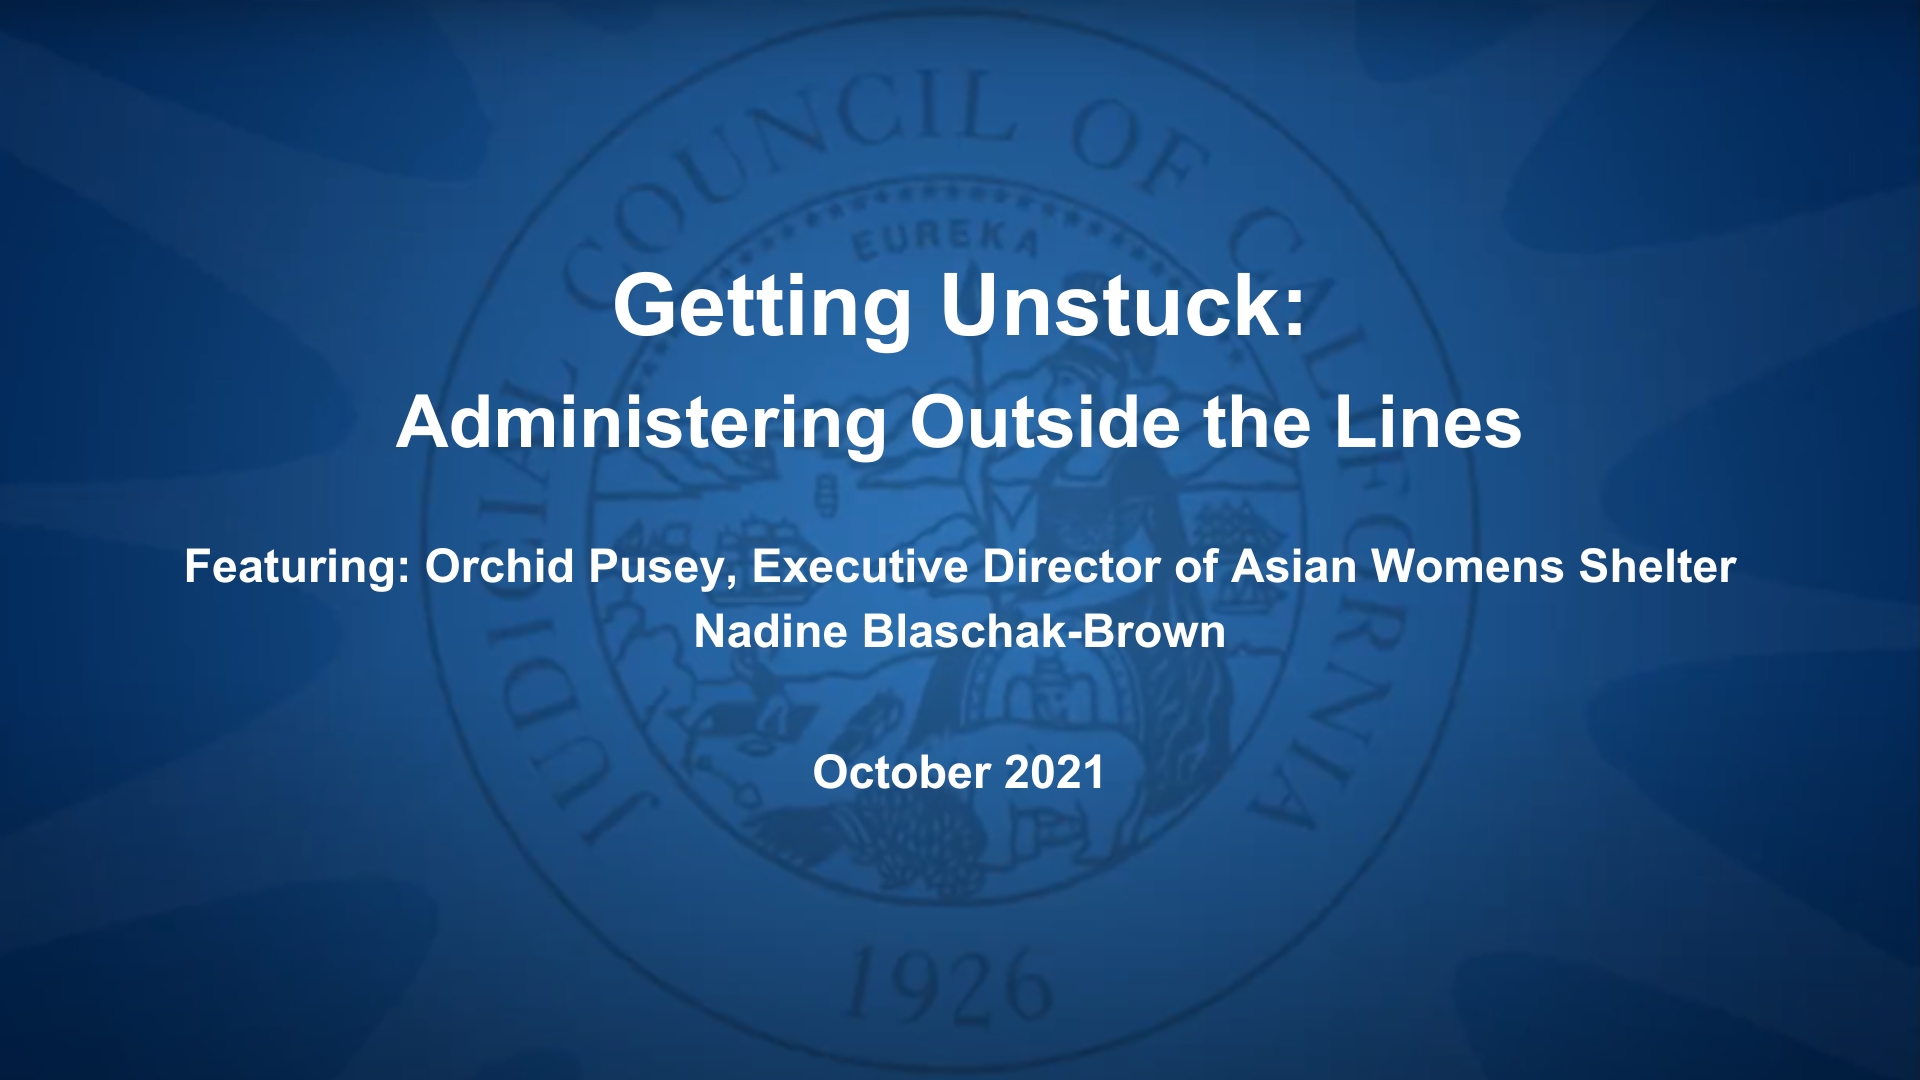 Getting Unstuck: Administering Outside the Lines